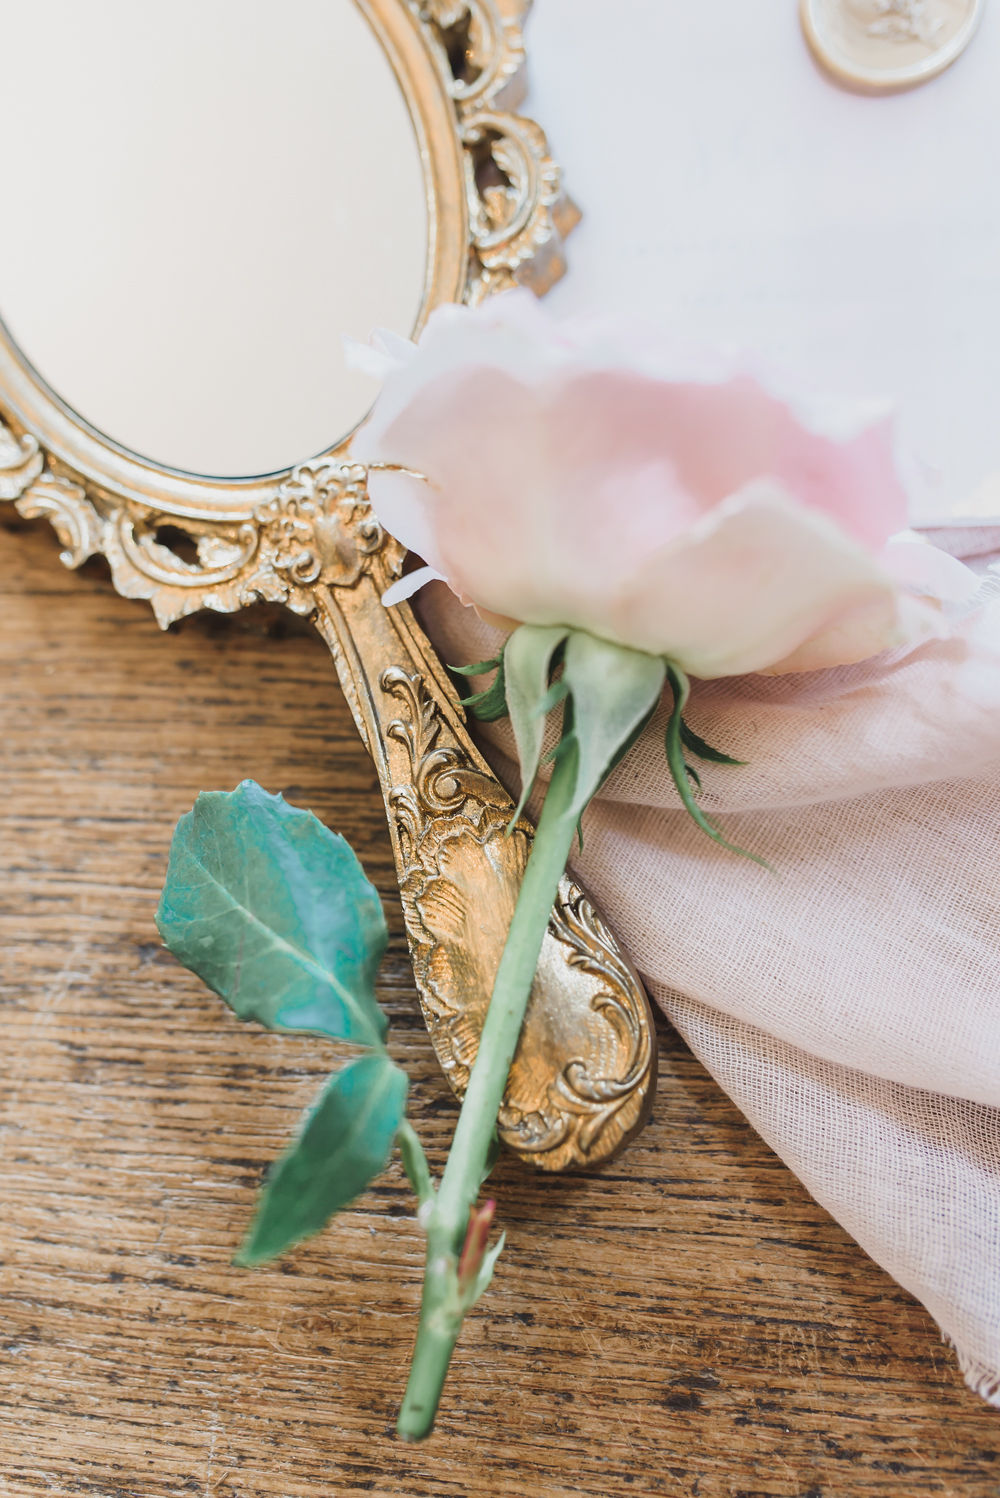 Elegant wedding inspiration in English country mansion Shaw House. Elegant wedding stationery, heirloom wedding stationery, wedding tablescape, sage green and pink colour scheme, vintage mirror